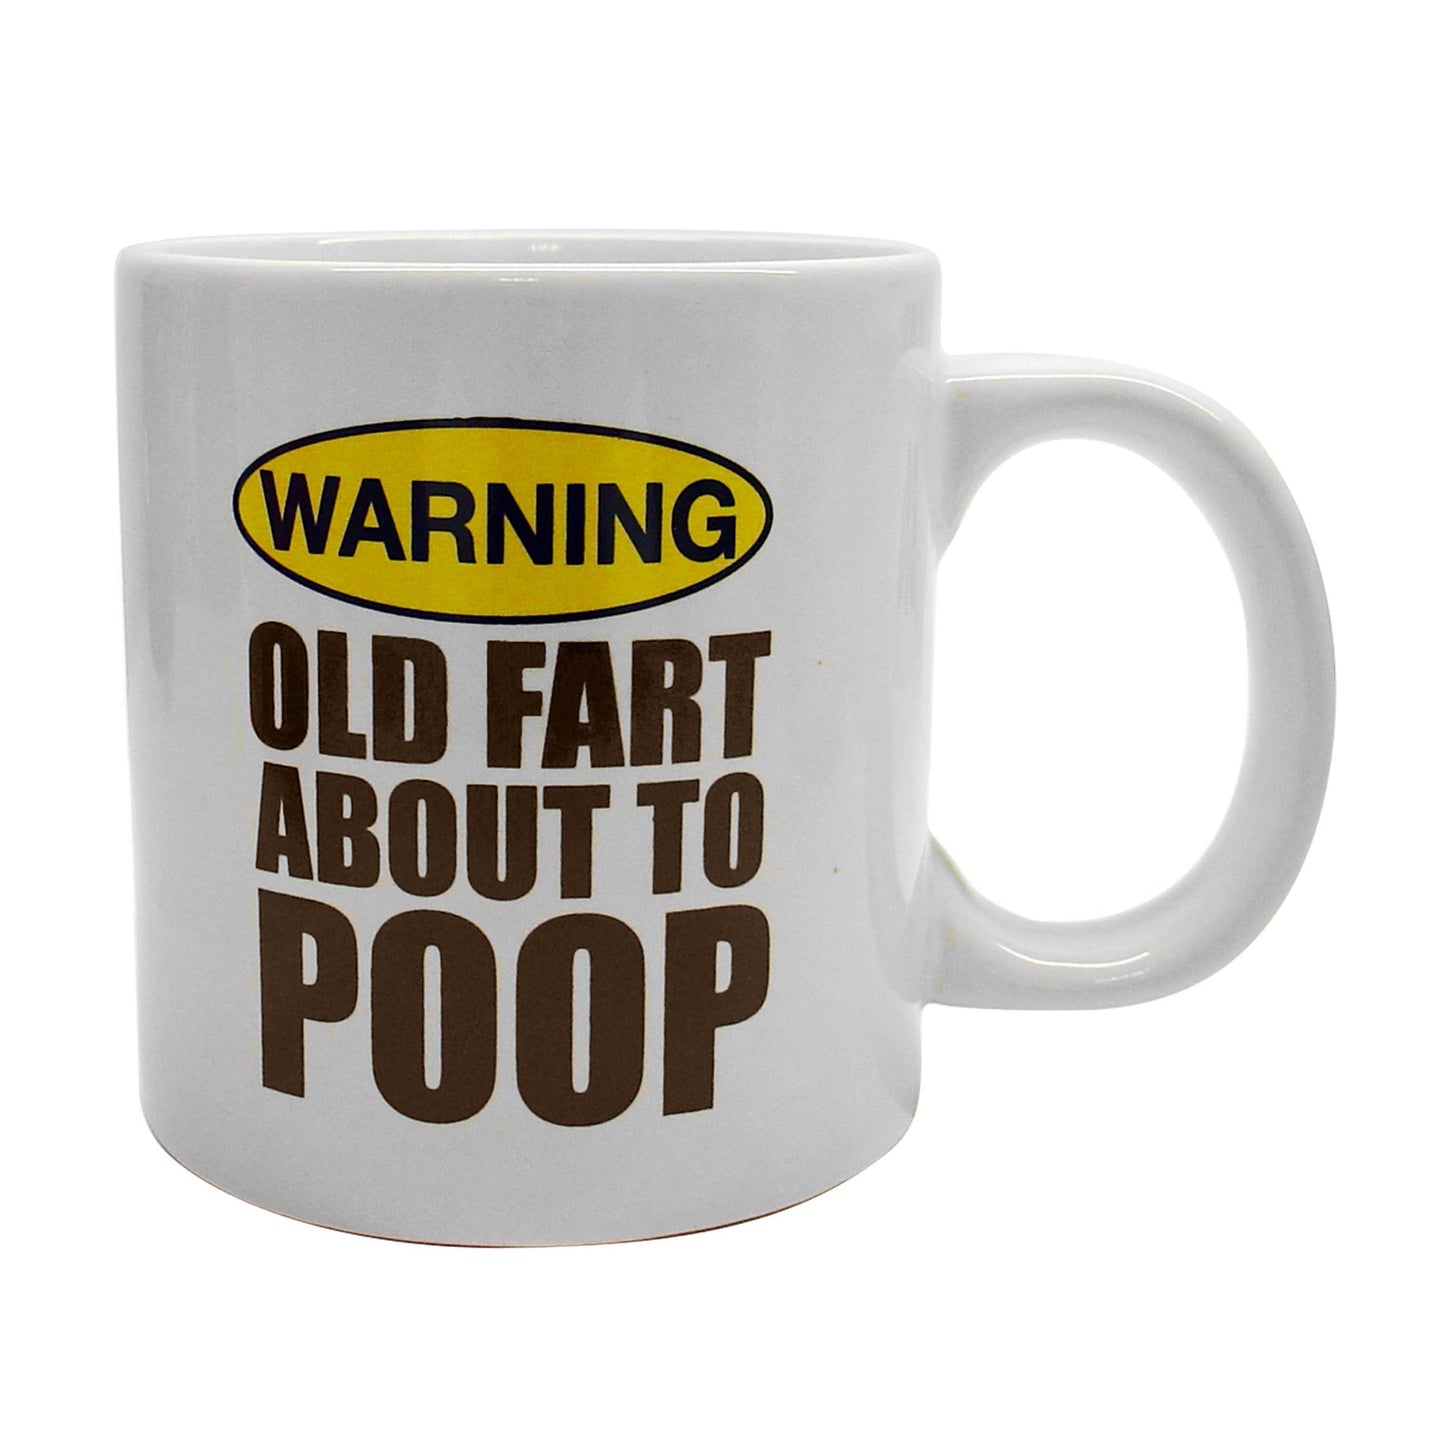 Giant Old Fart About To Poop Mug